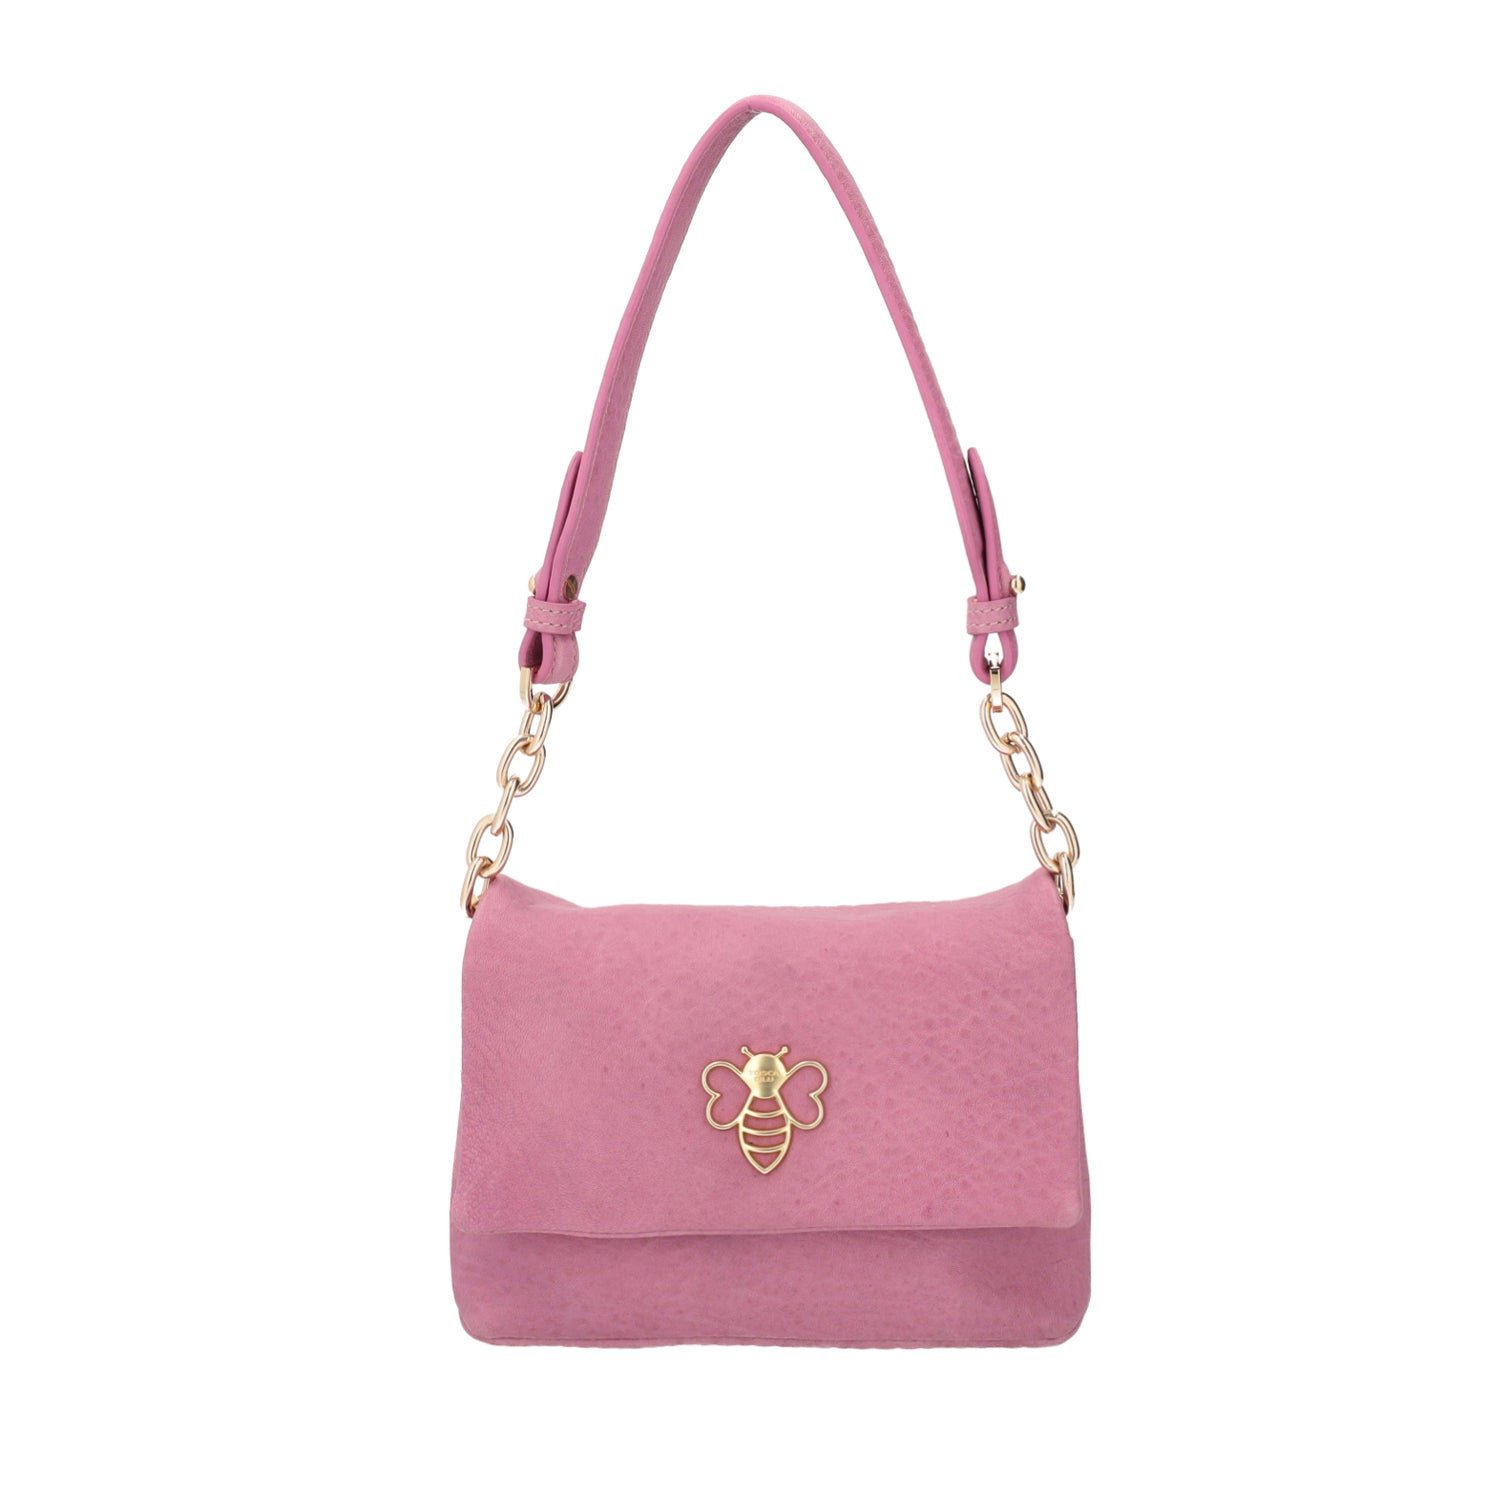 PINK GLADIOLO CROSSBODY BAG IN LEATHER